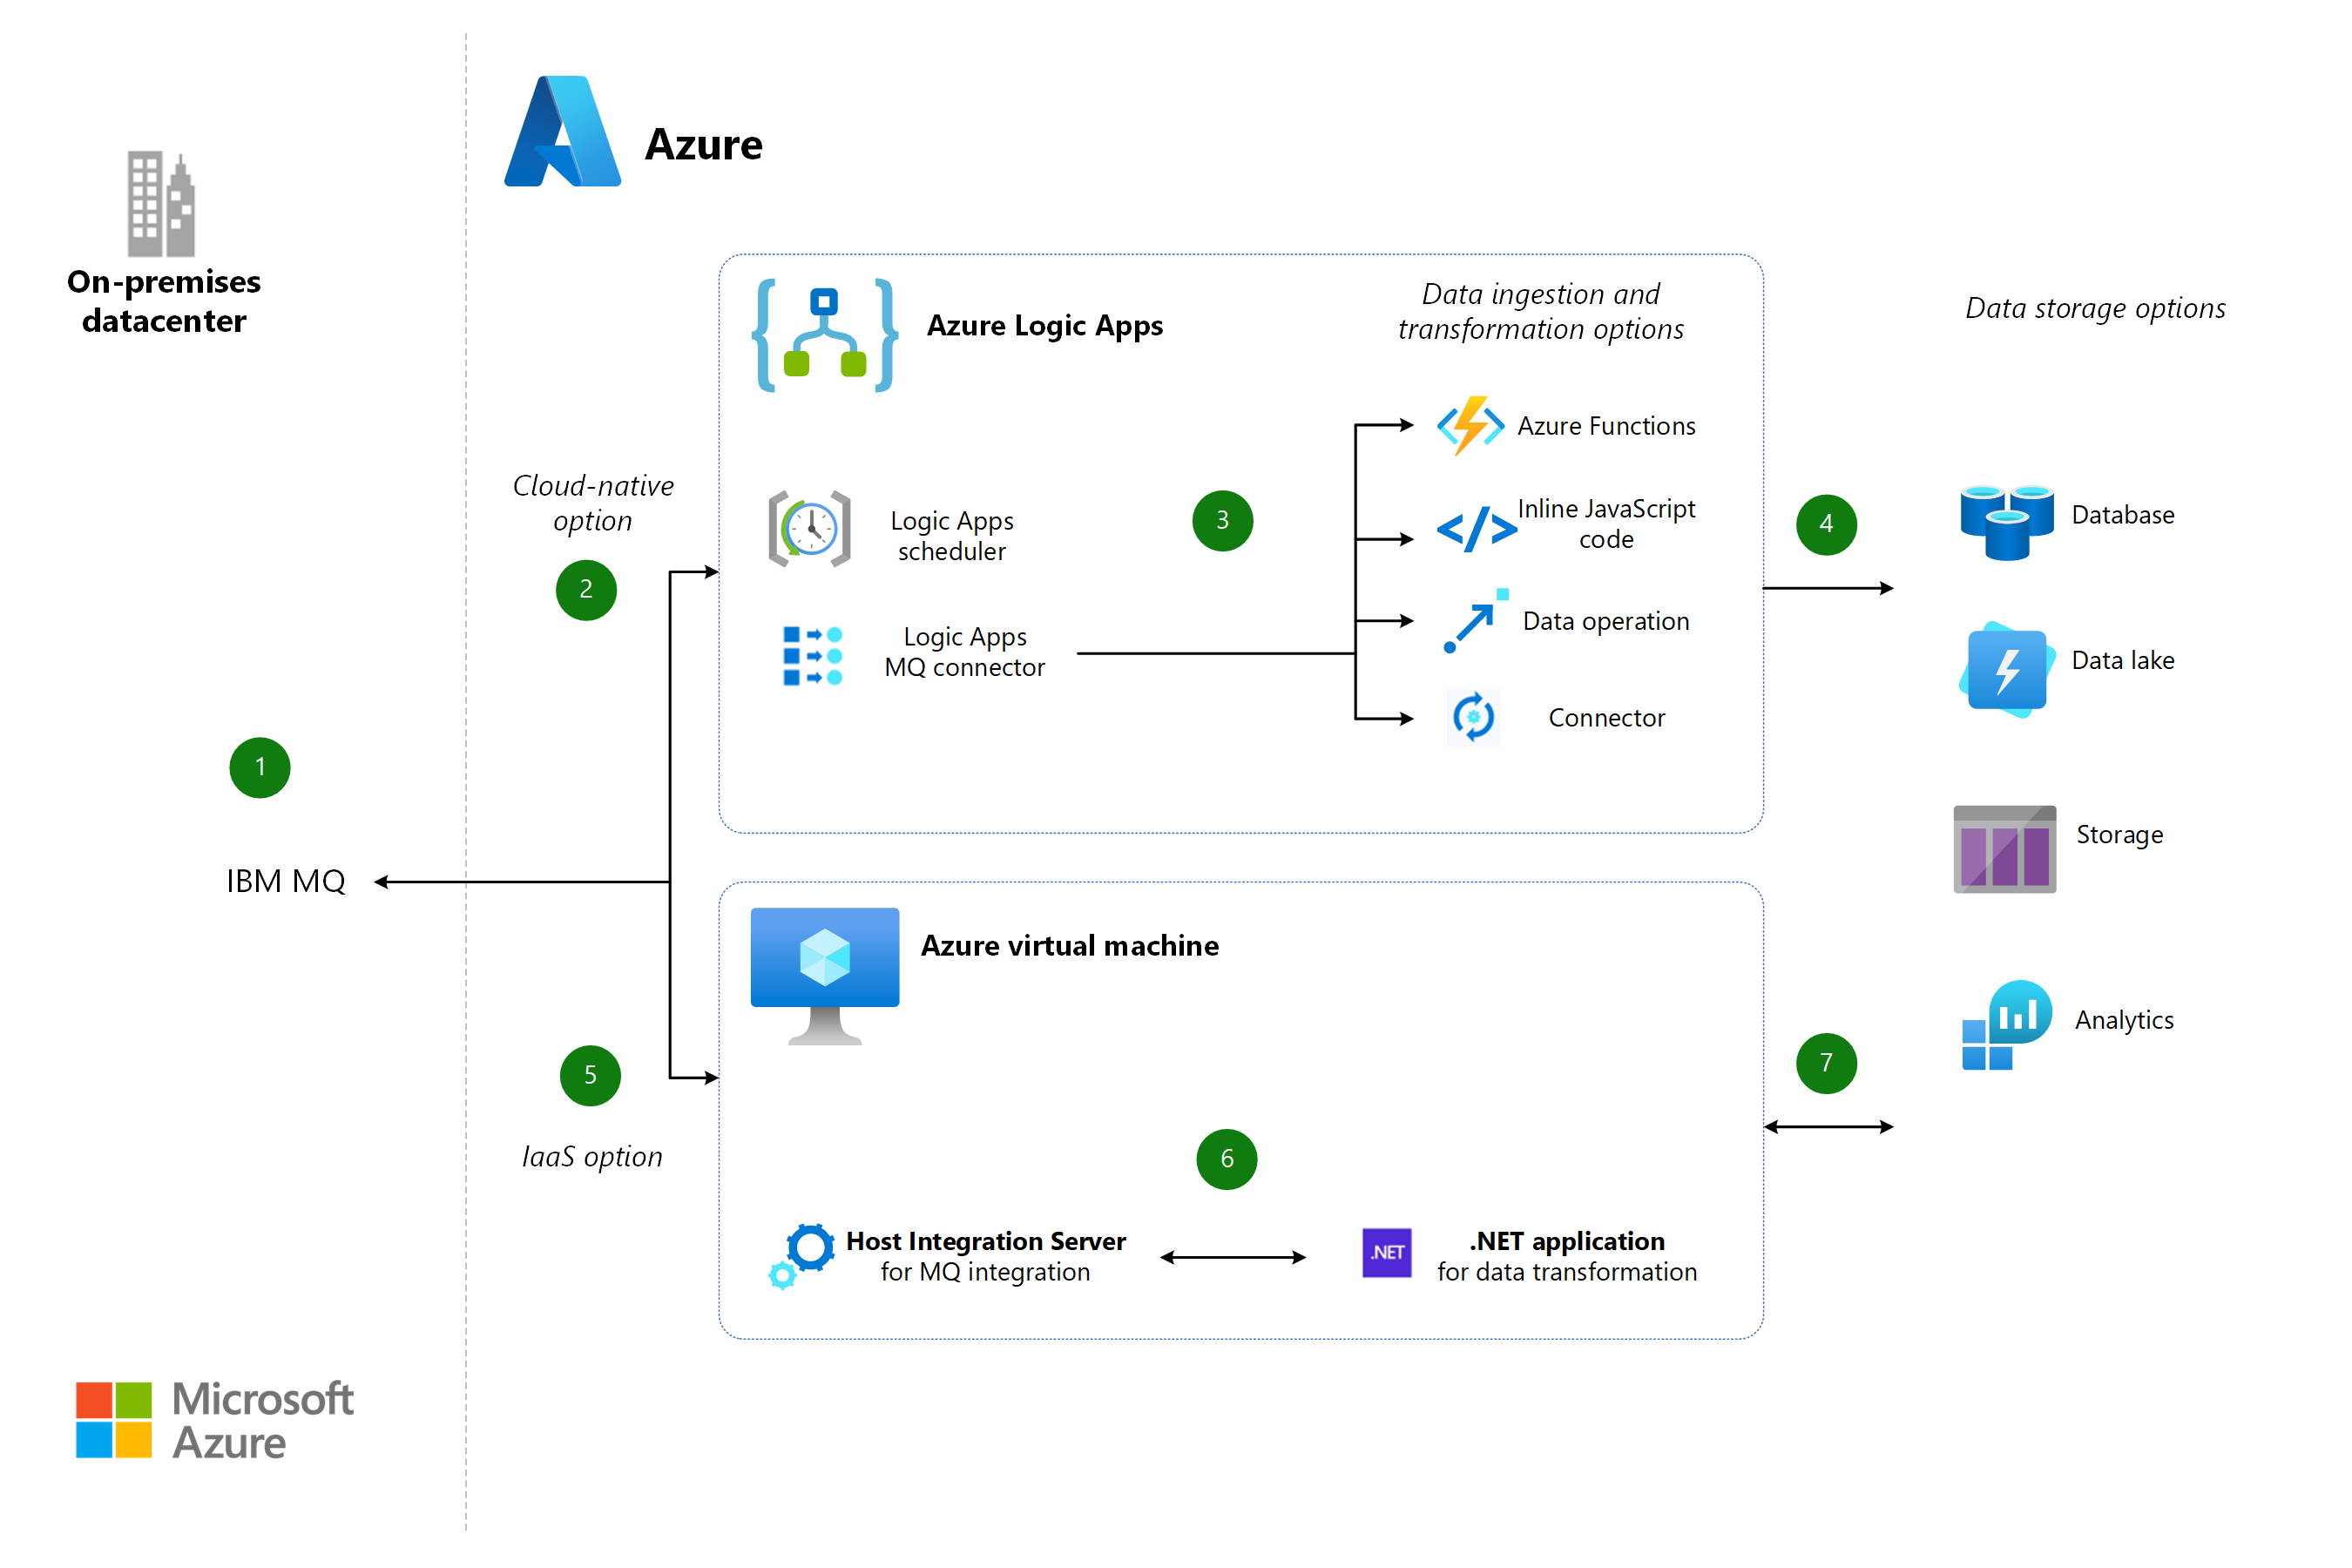 Thumbnail of Integrate IBM mainframe and midrange message queues with Azure Architectural Diagram.